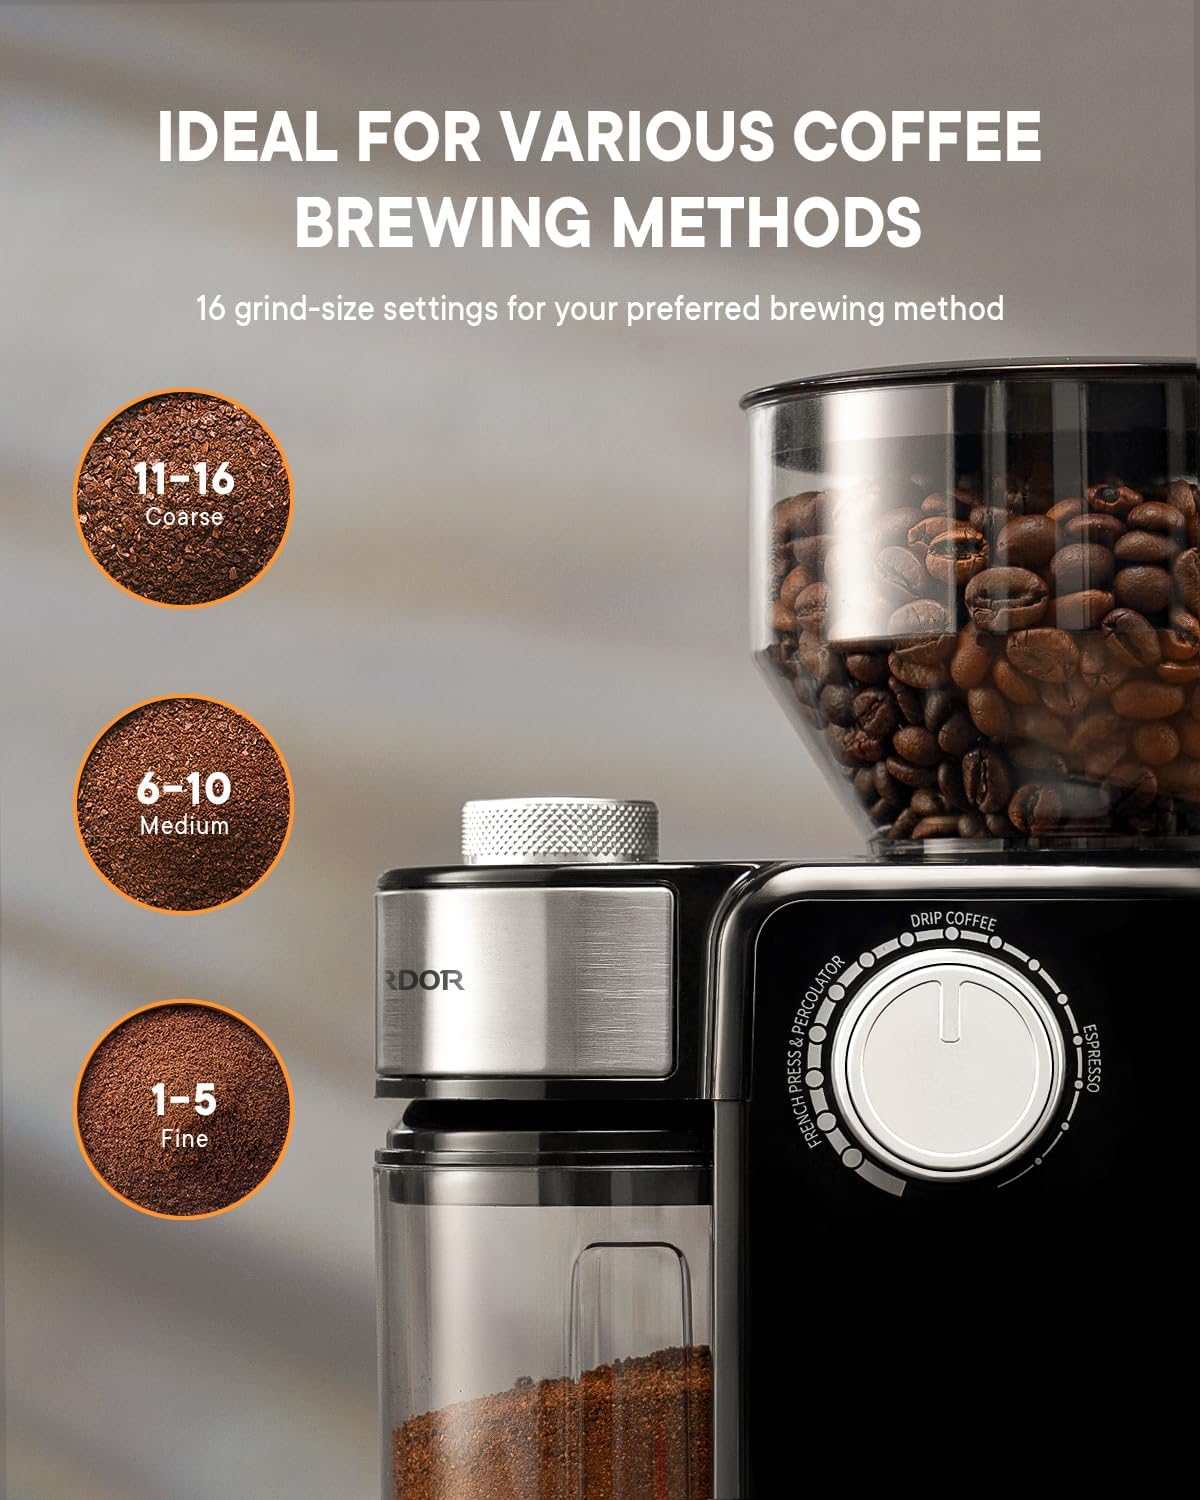 SHARDOR Electric Burr Coffee Grinder 2.0, Adjustable Burr Mill with 16 Precise Grind Setting for 2-14 Cup, Black